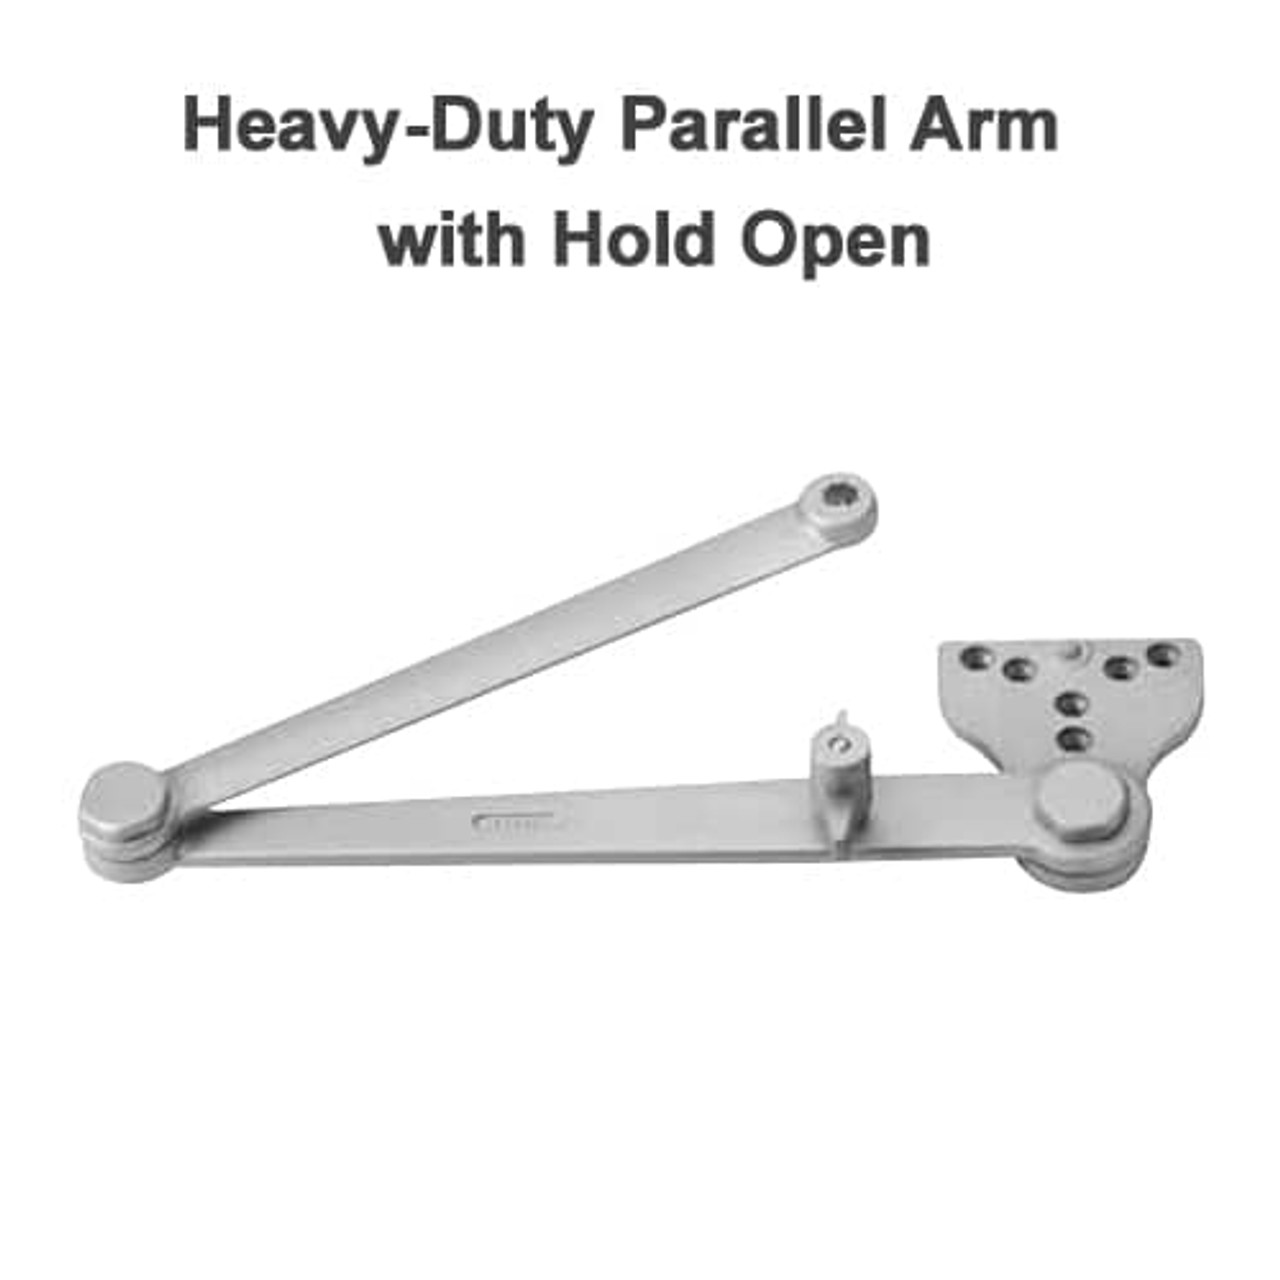 DC6210-A2-693-M54 Corbin 6000 Series Multi-Sized Heavy-Duty Parallel Arm Door Closers with Hold Open Arm in Black